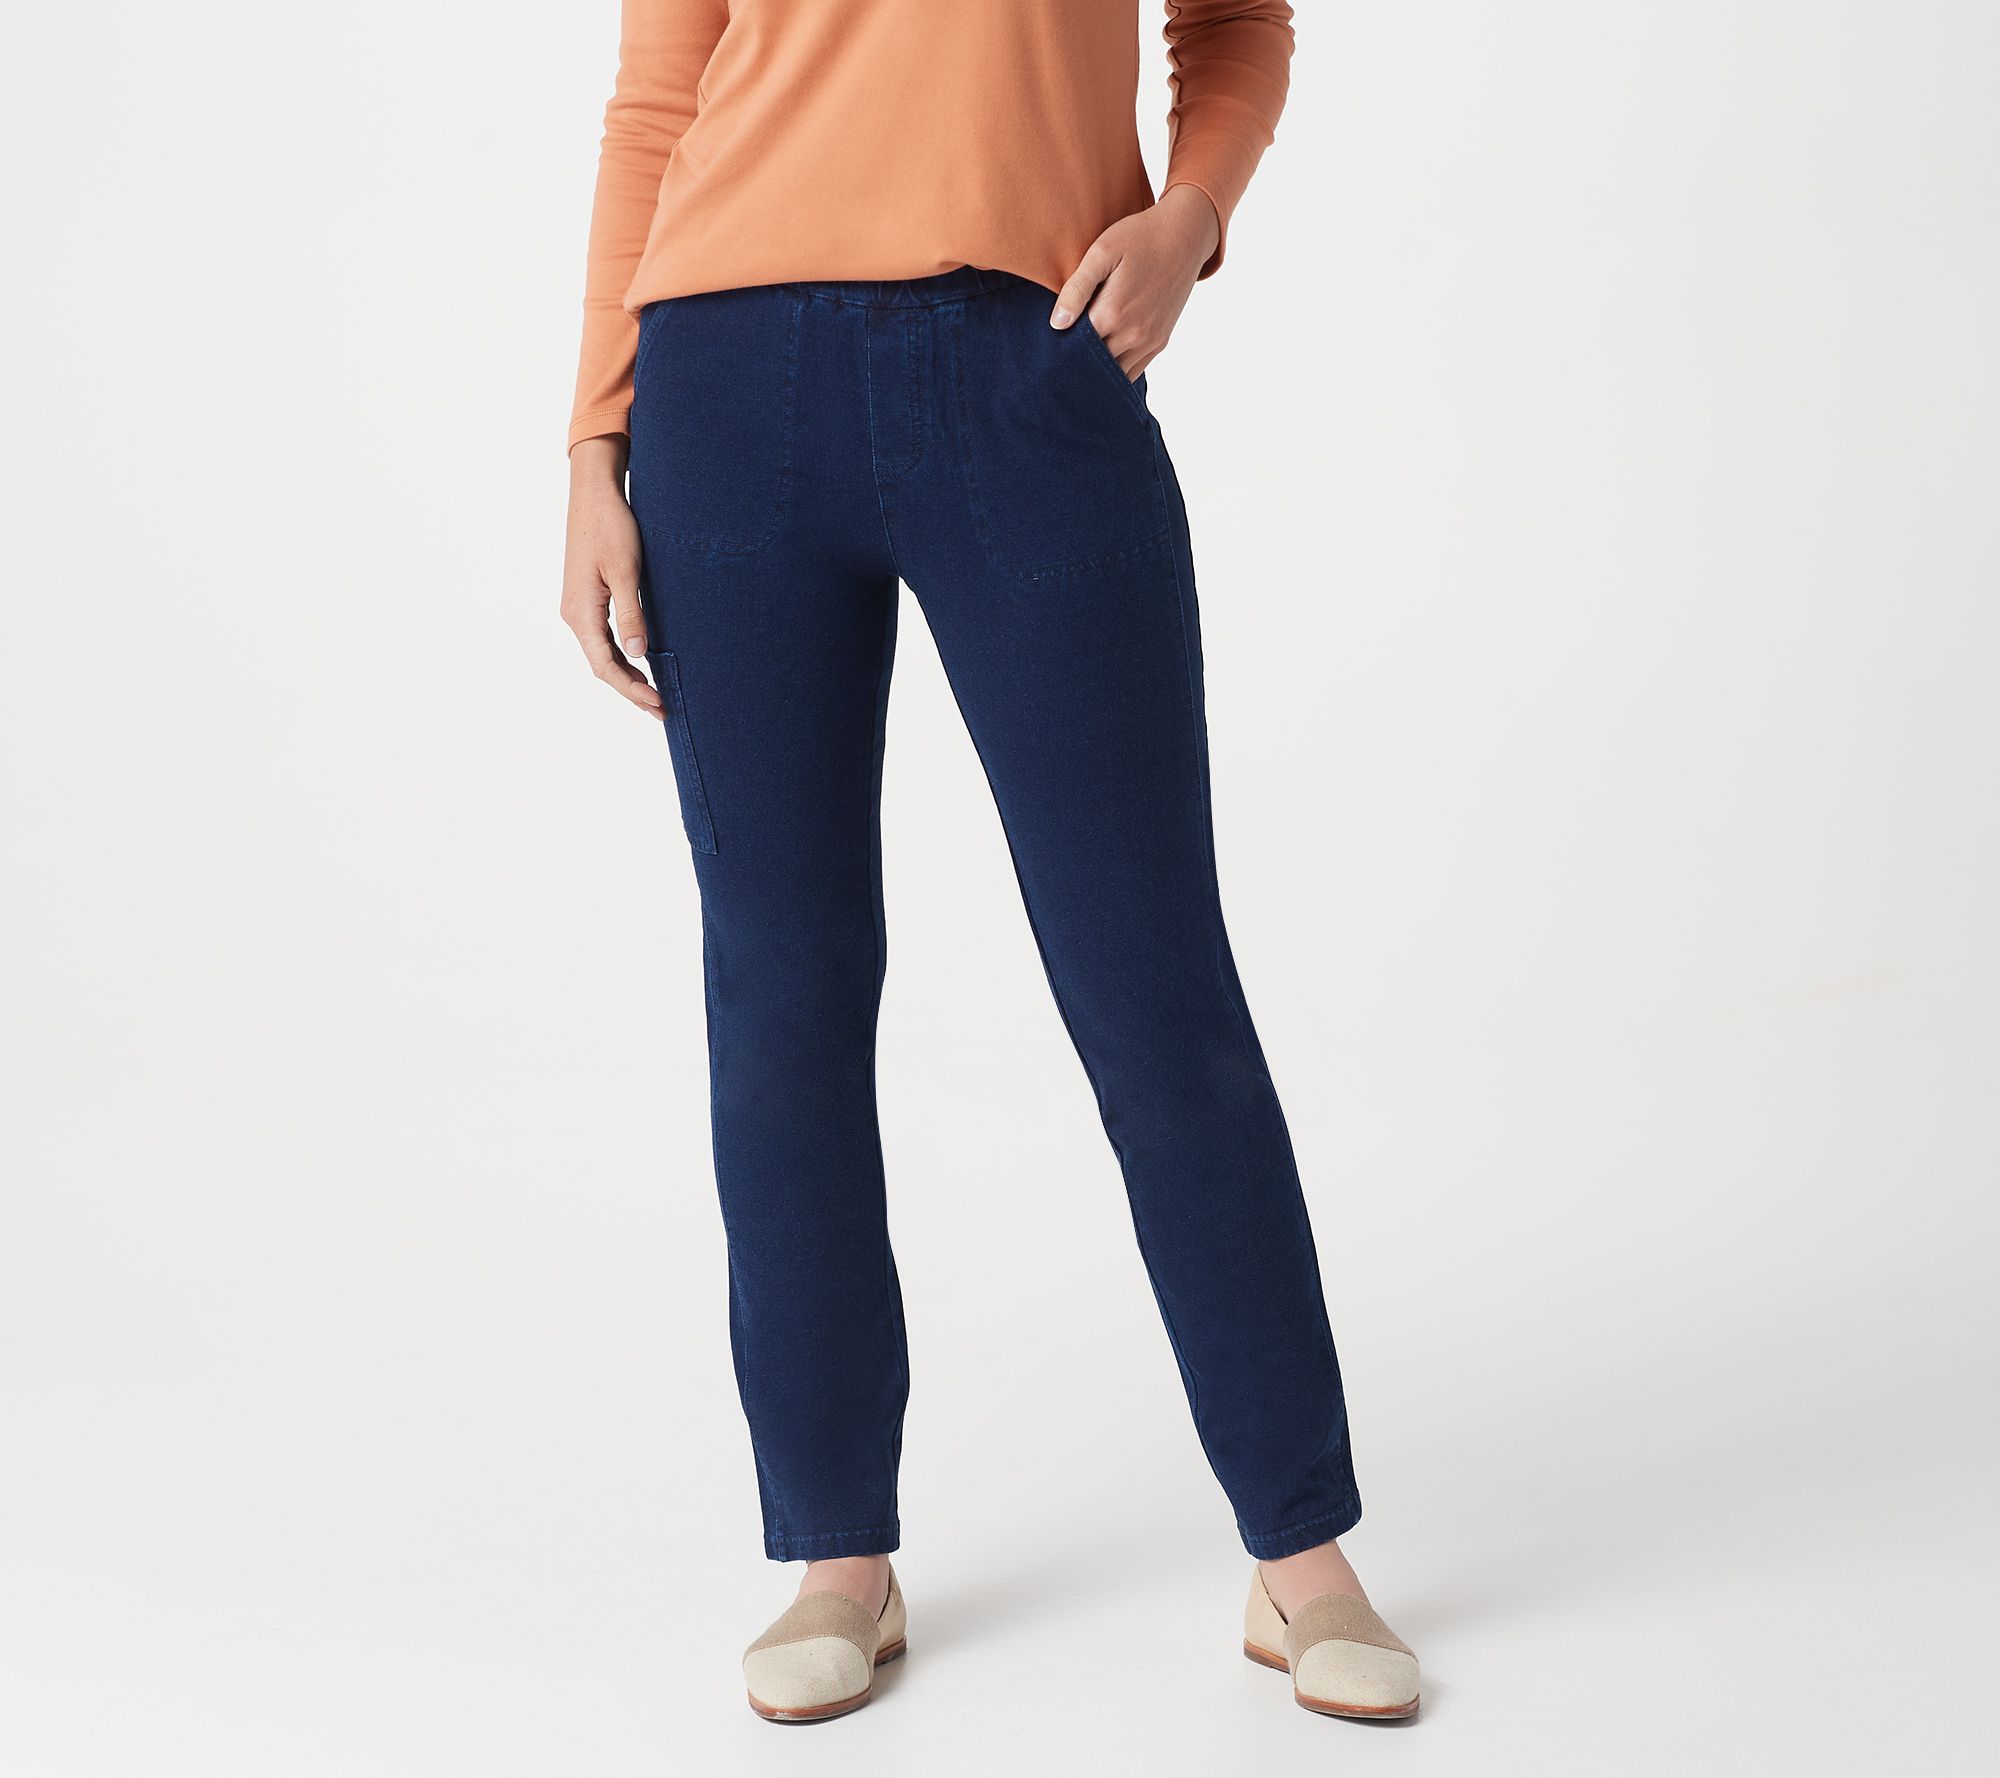 Essential Knit Seamed Pants